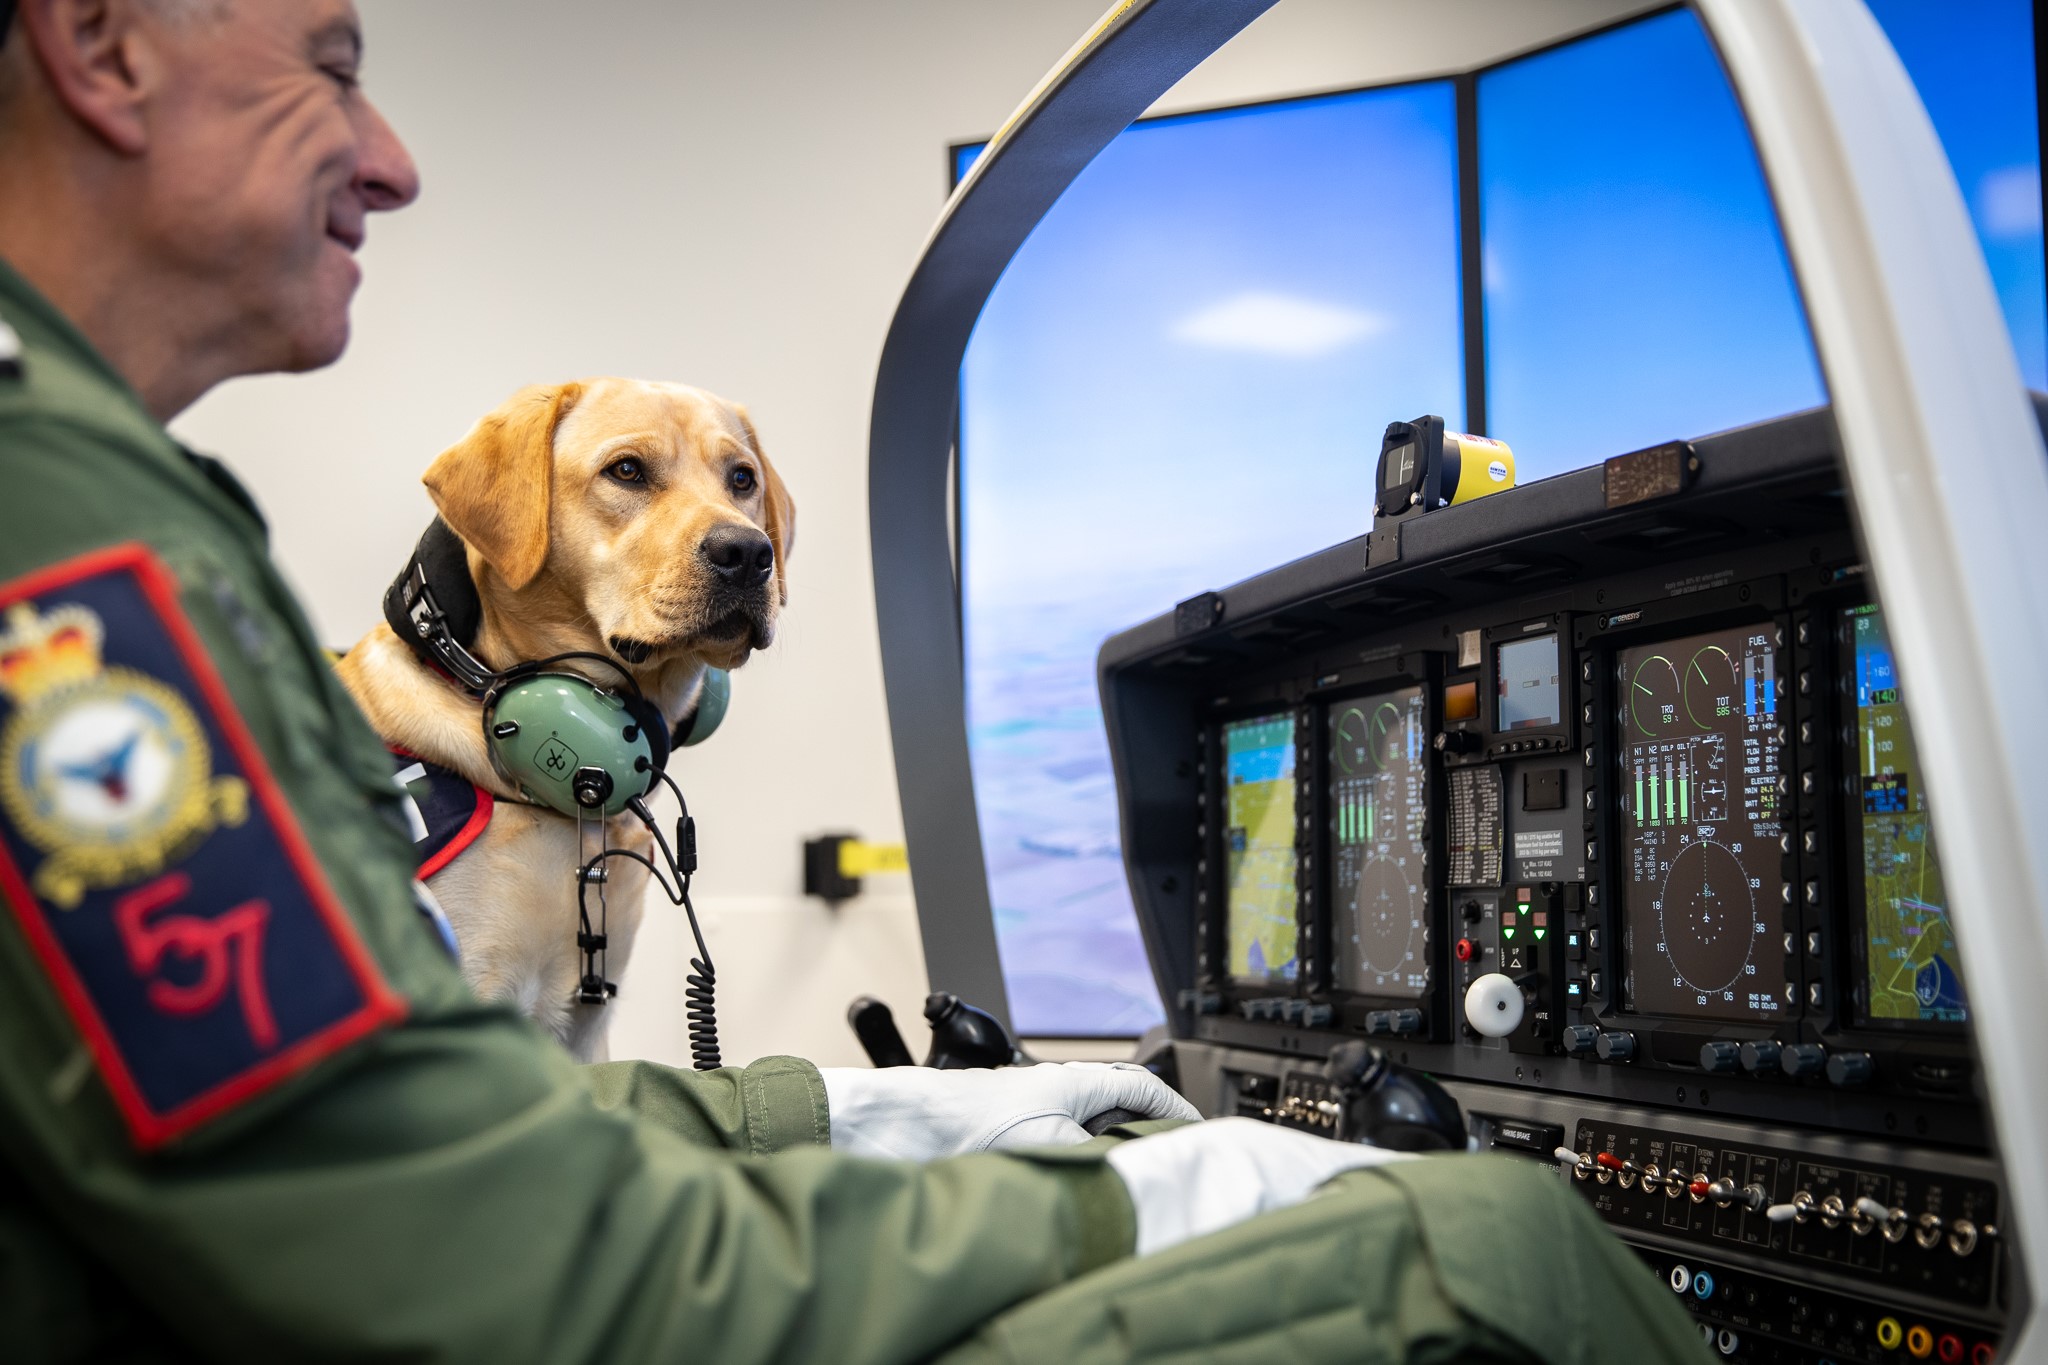 Image shows RAF pilot and Assistant Dog sitting in a carrier aircraft cockpit.